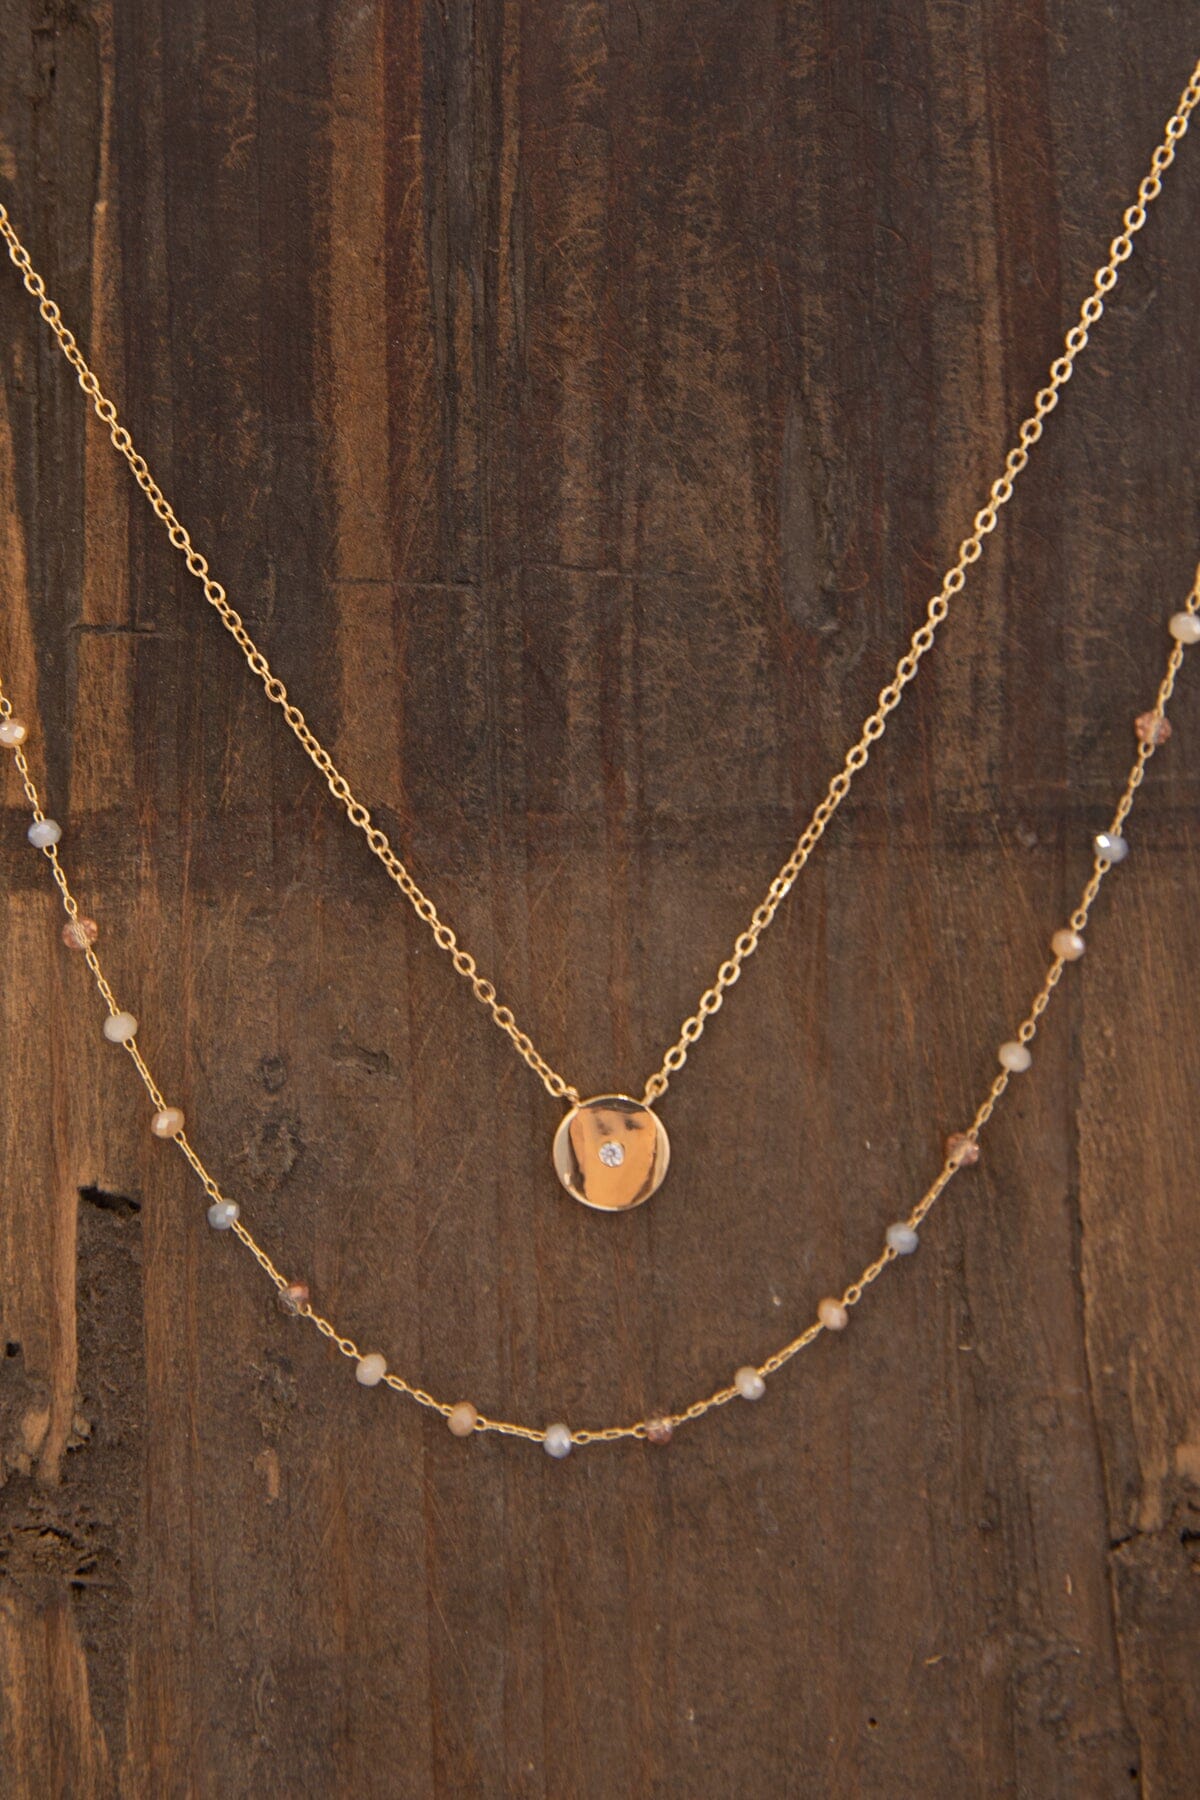 Gold Dainty Layered Chain Necklace - Filly Flair